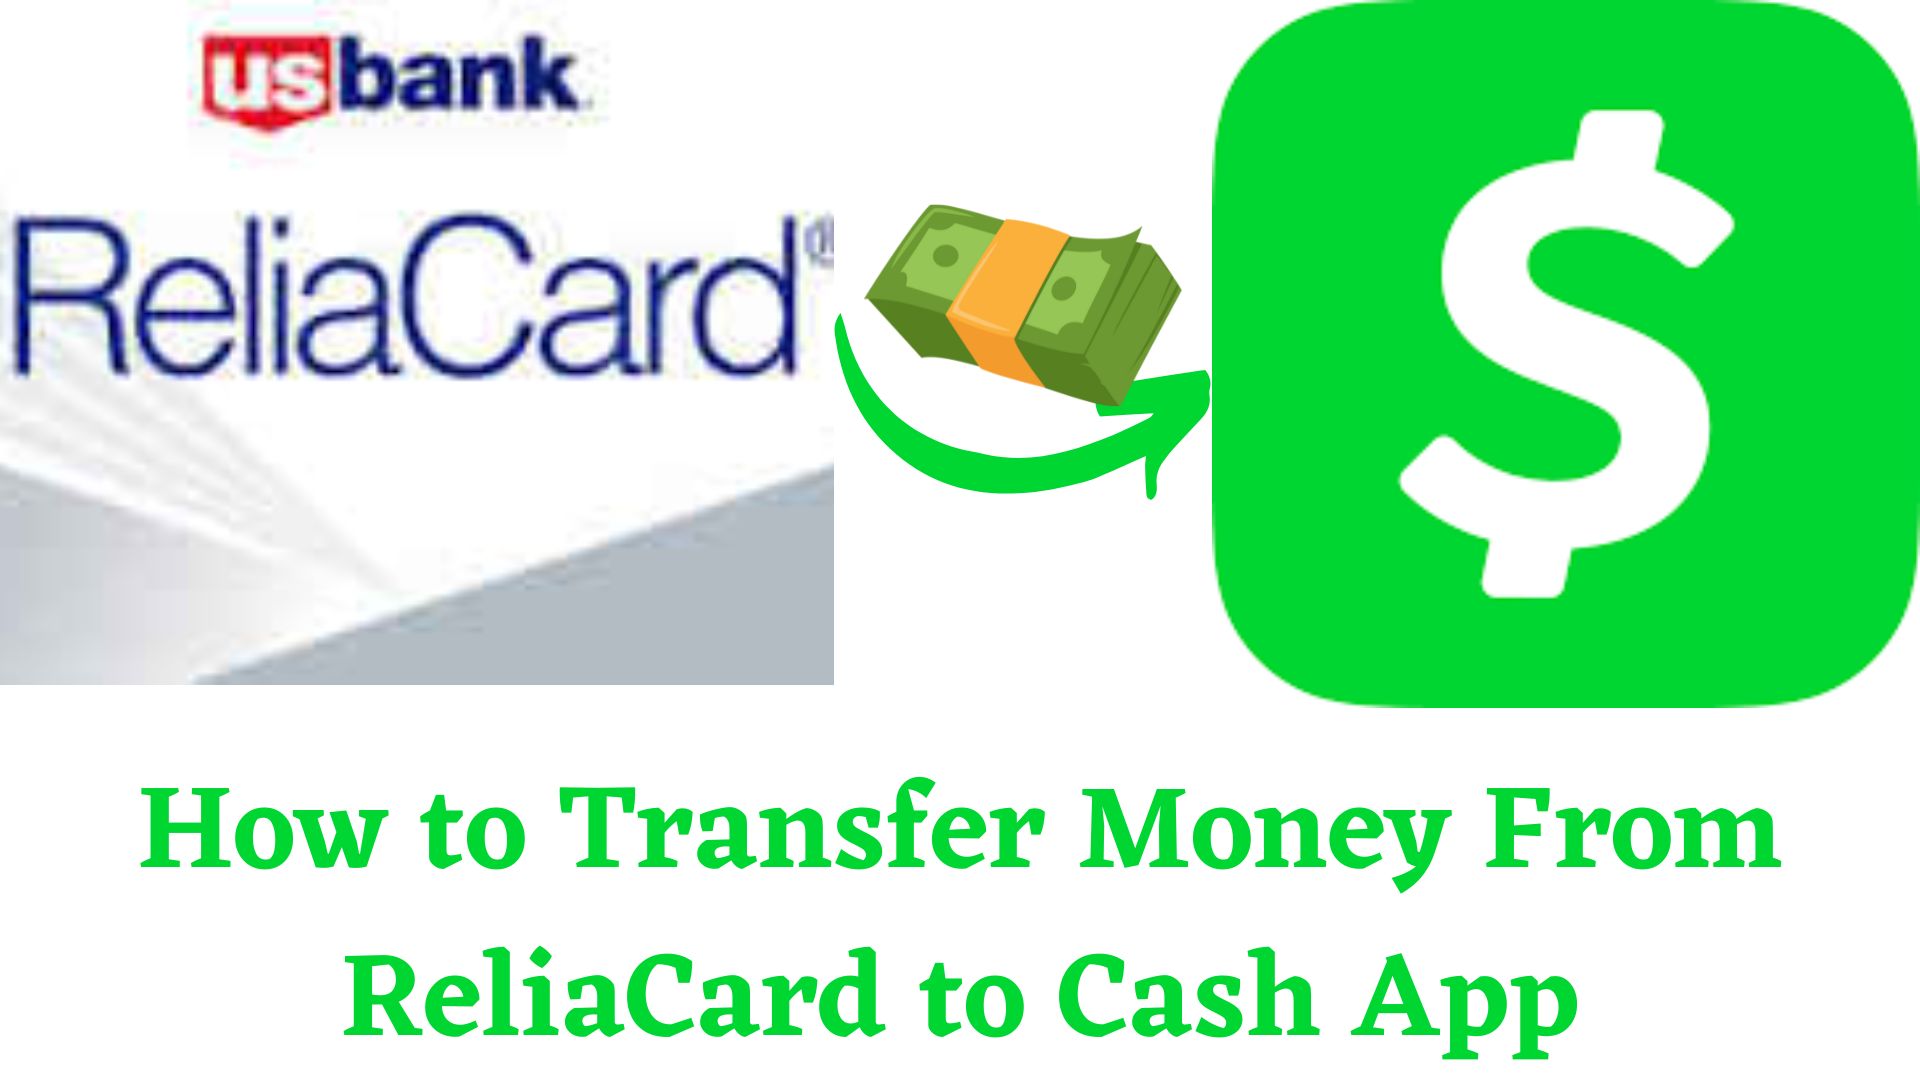 Transfer Money From ReliaCard to Cash App